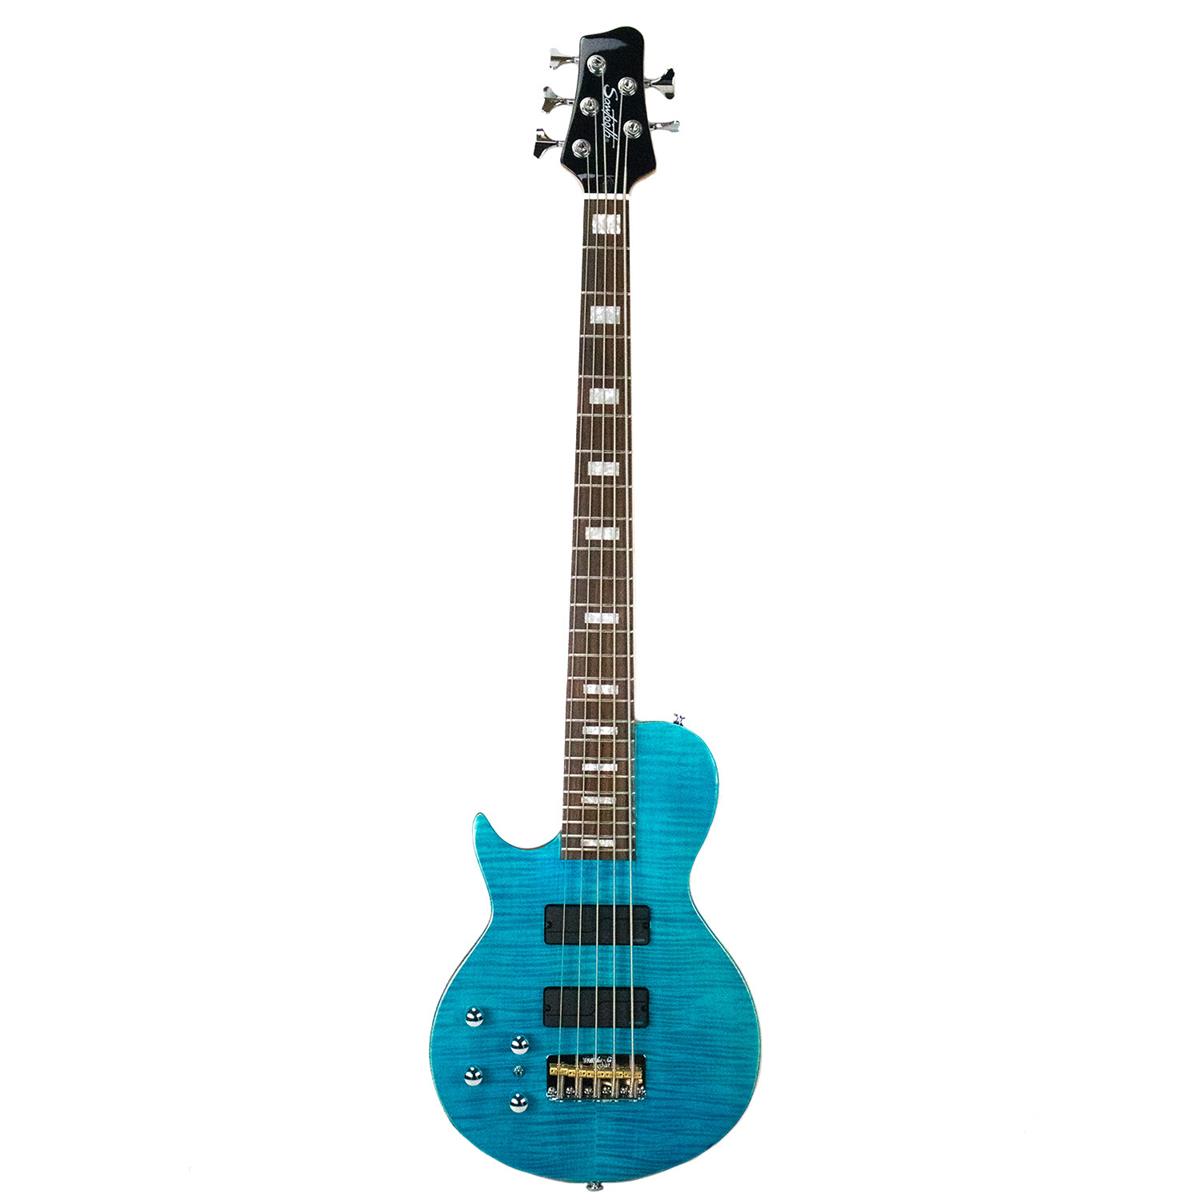 Sawtooth Americana Heritage 5-String Left-Handed Bass Guitar, Cali Blue Flame -  ST-HBS5-LH-CBFL